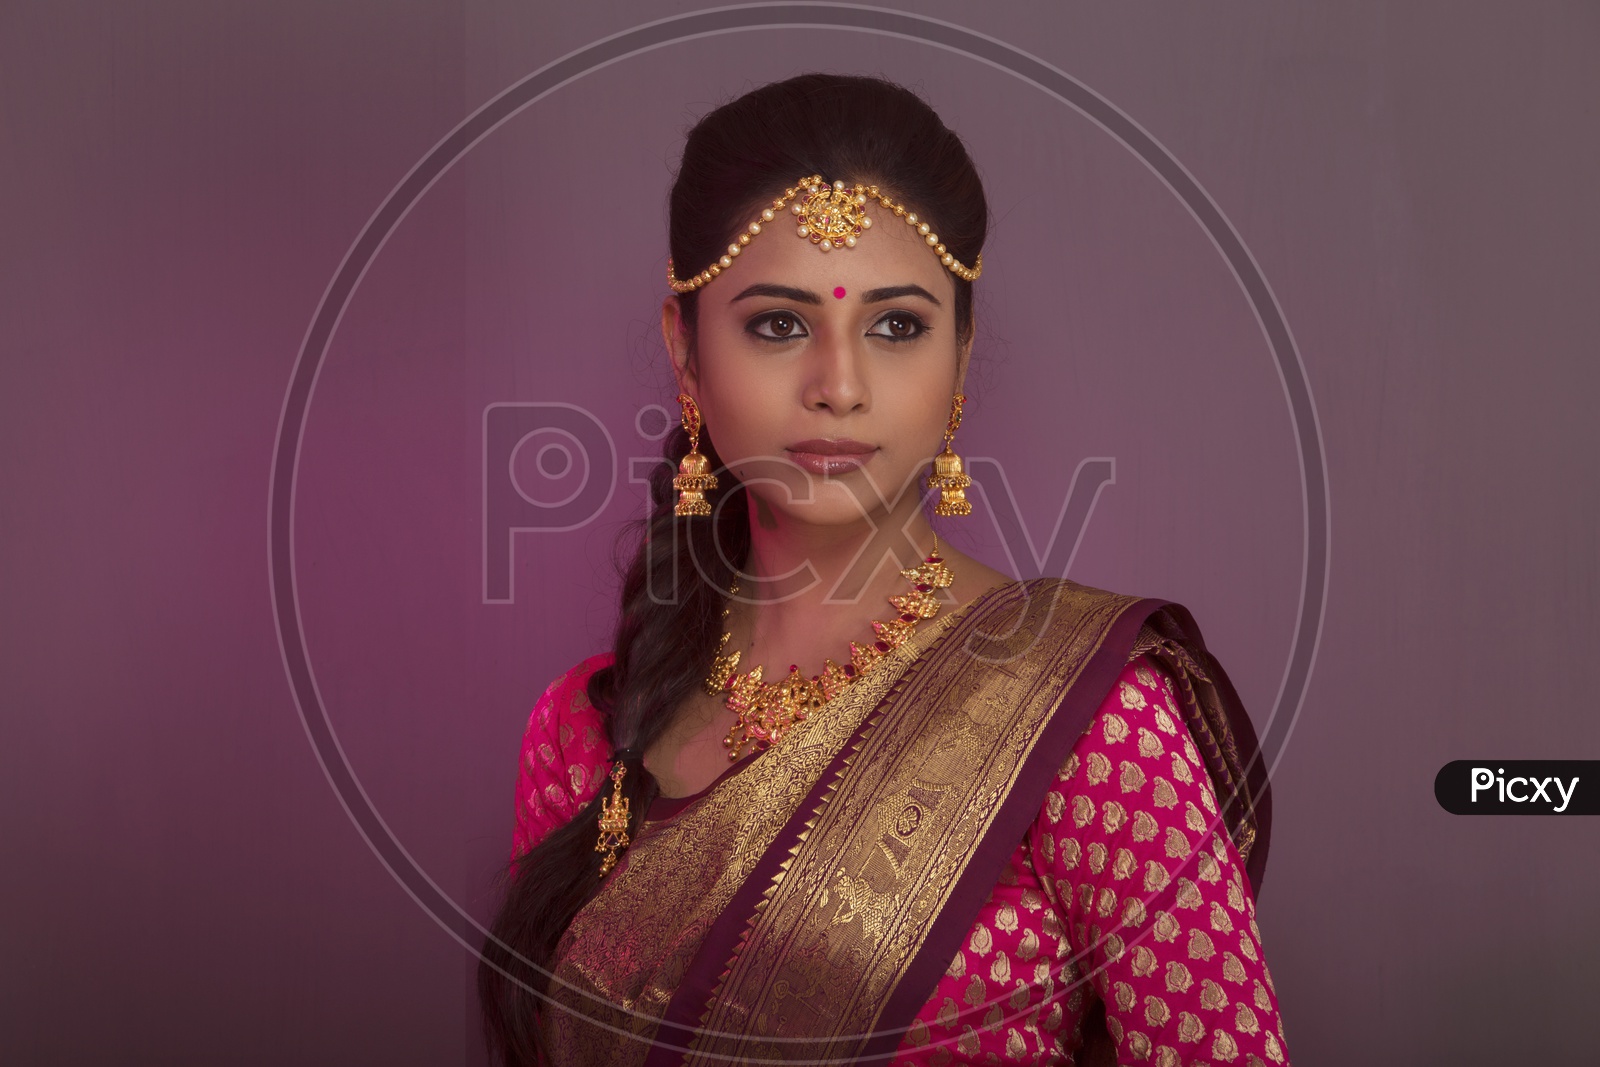 Indian bride dressed up in red saree portrait in Studio Lighting / Traditionally dressed up girl